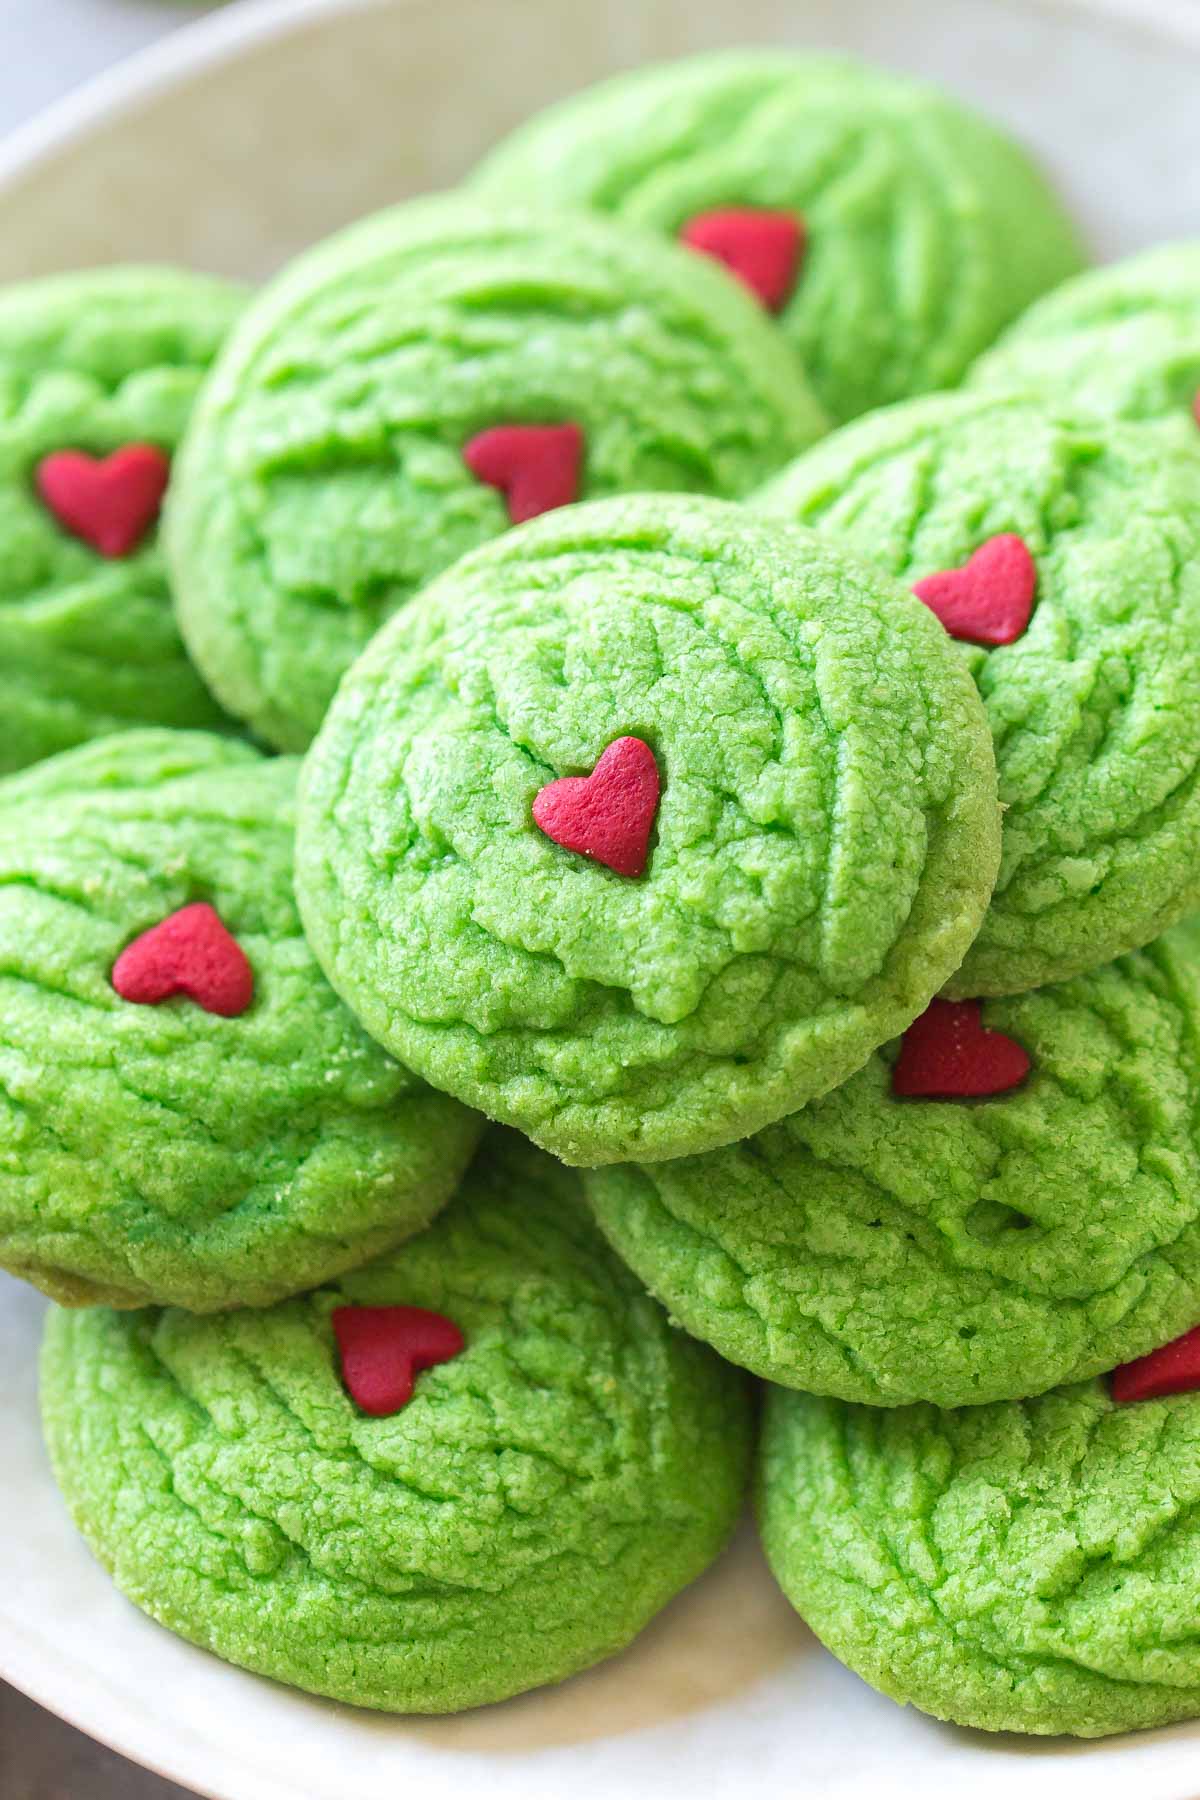 Dairy Free Grinch Cookies | dairy free Christmas cookies, Grinch cookies from scratch #dairyfree #christmascookies #cookies #Christmas #simplywhisked | @simplywhisked